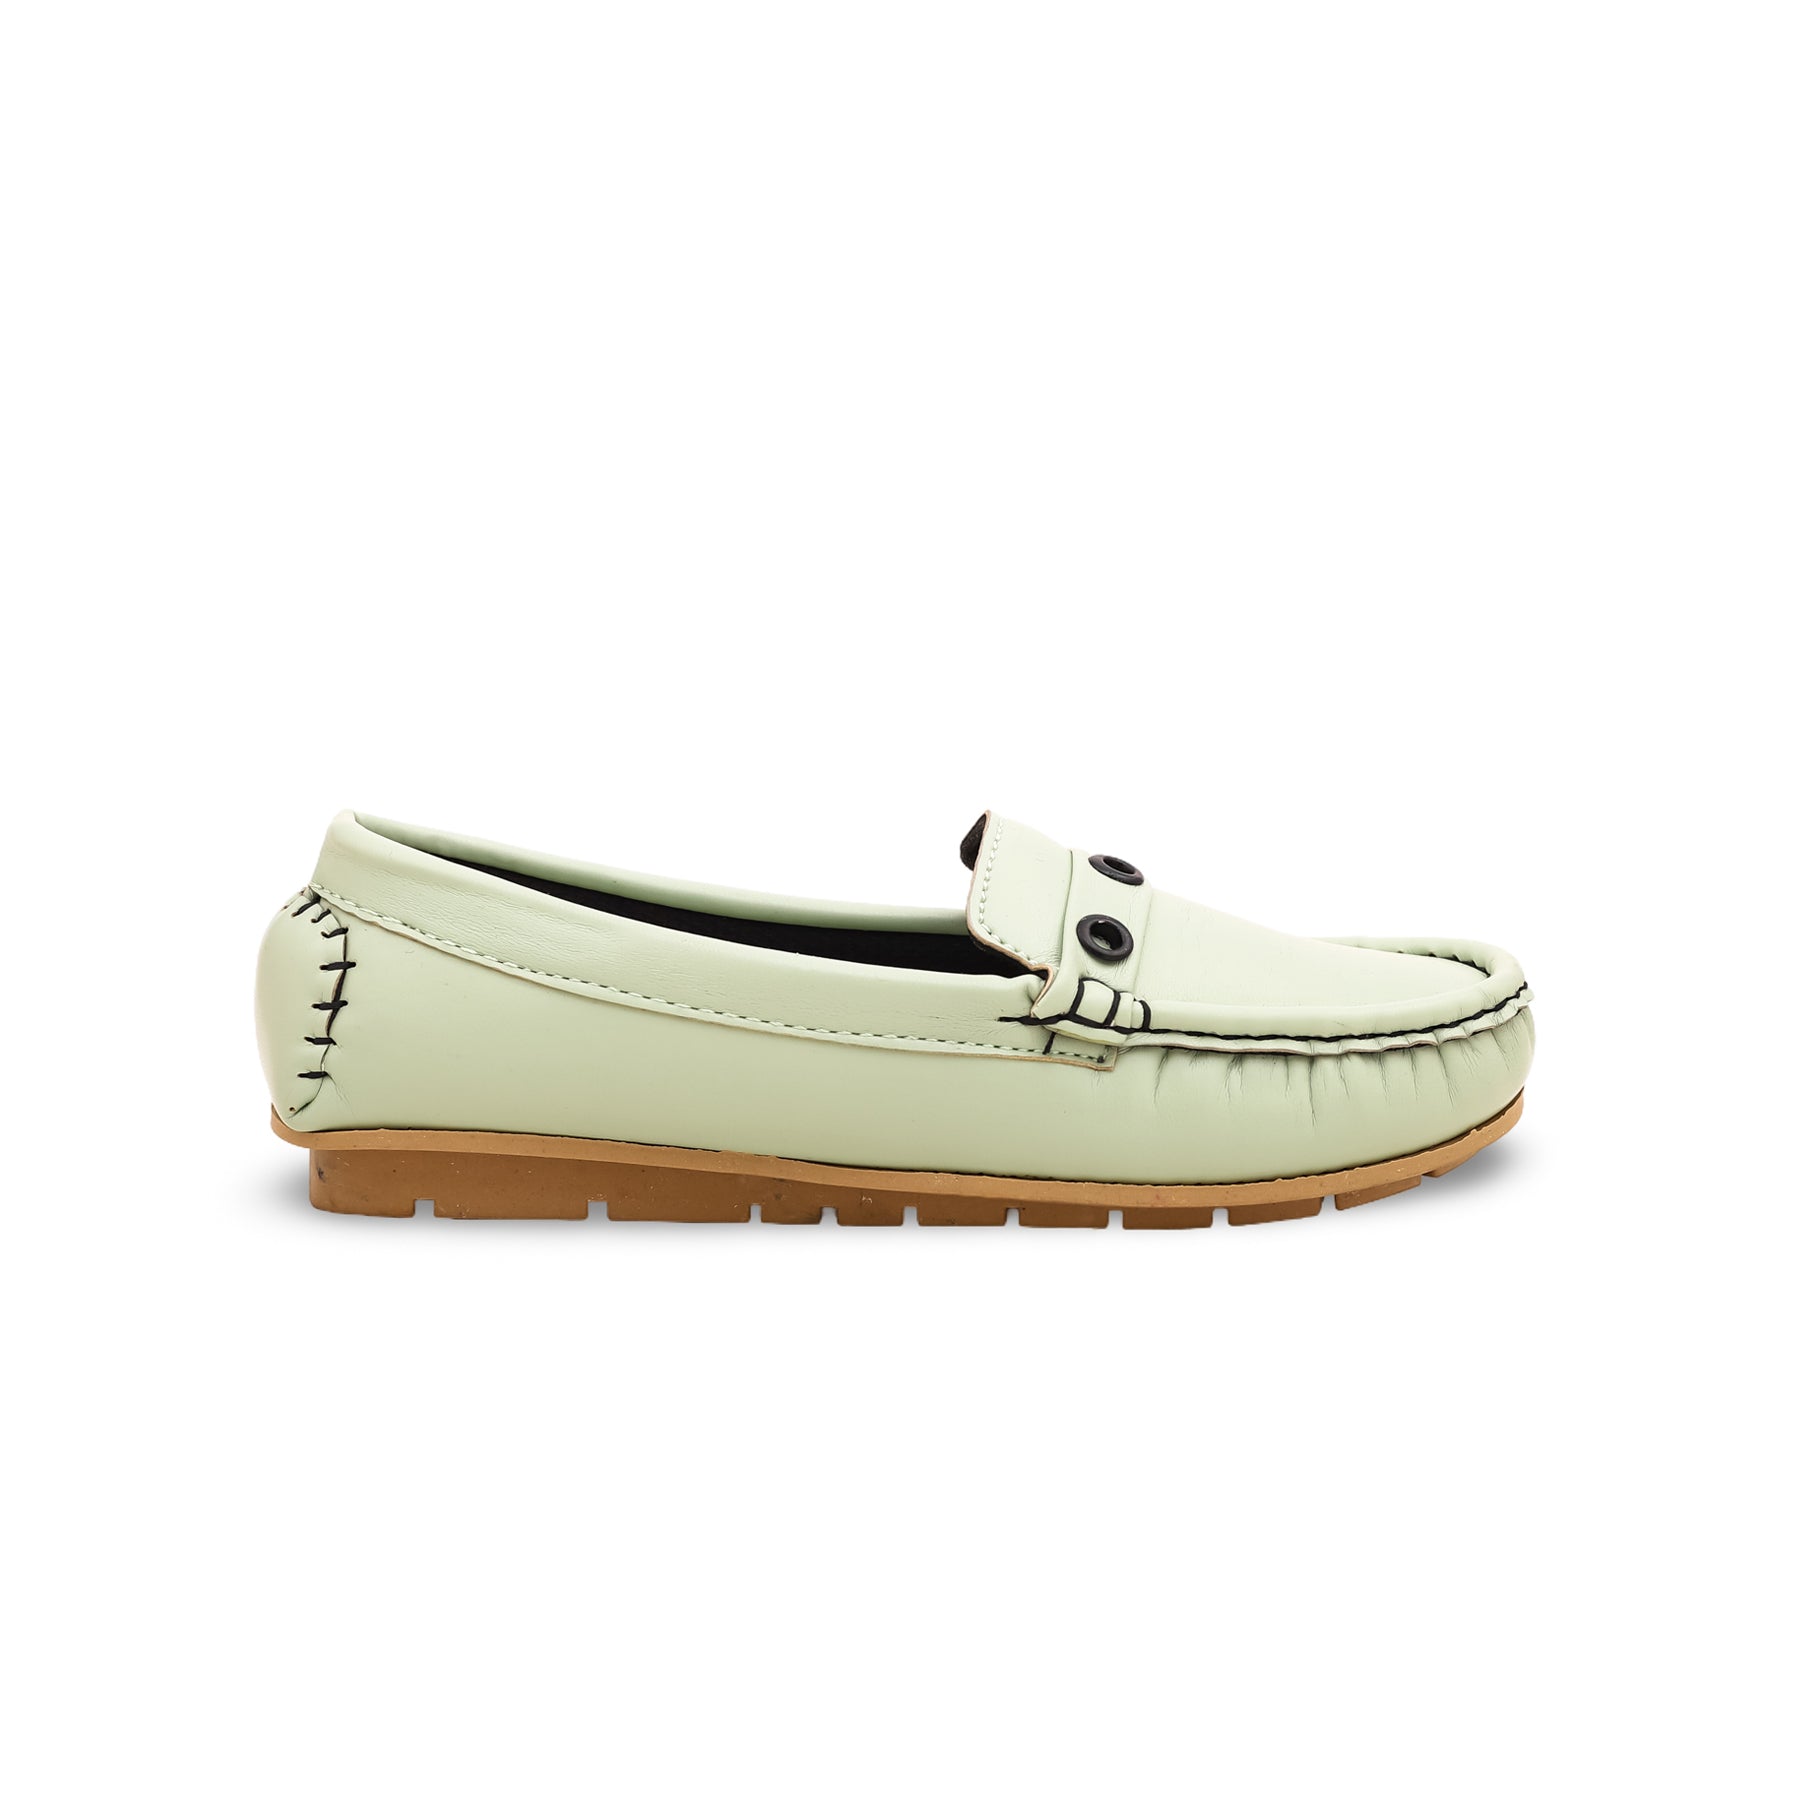 Girls PISTAGREEN Casual Moccasin KD0752